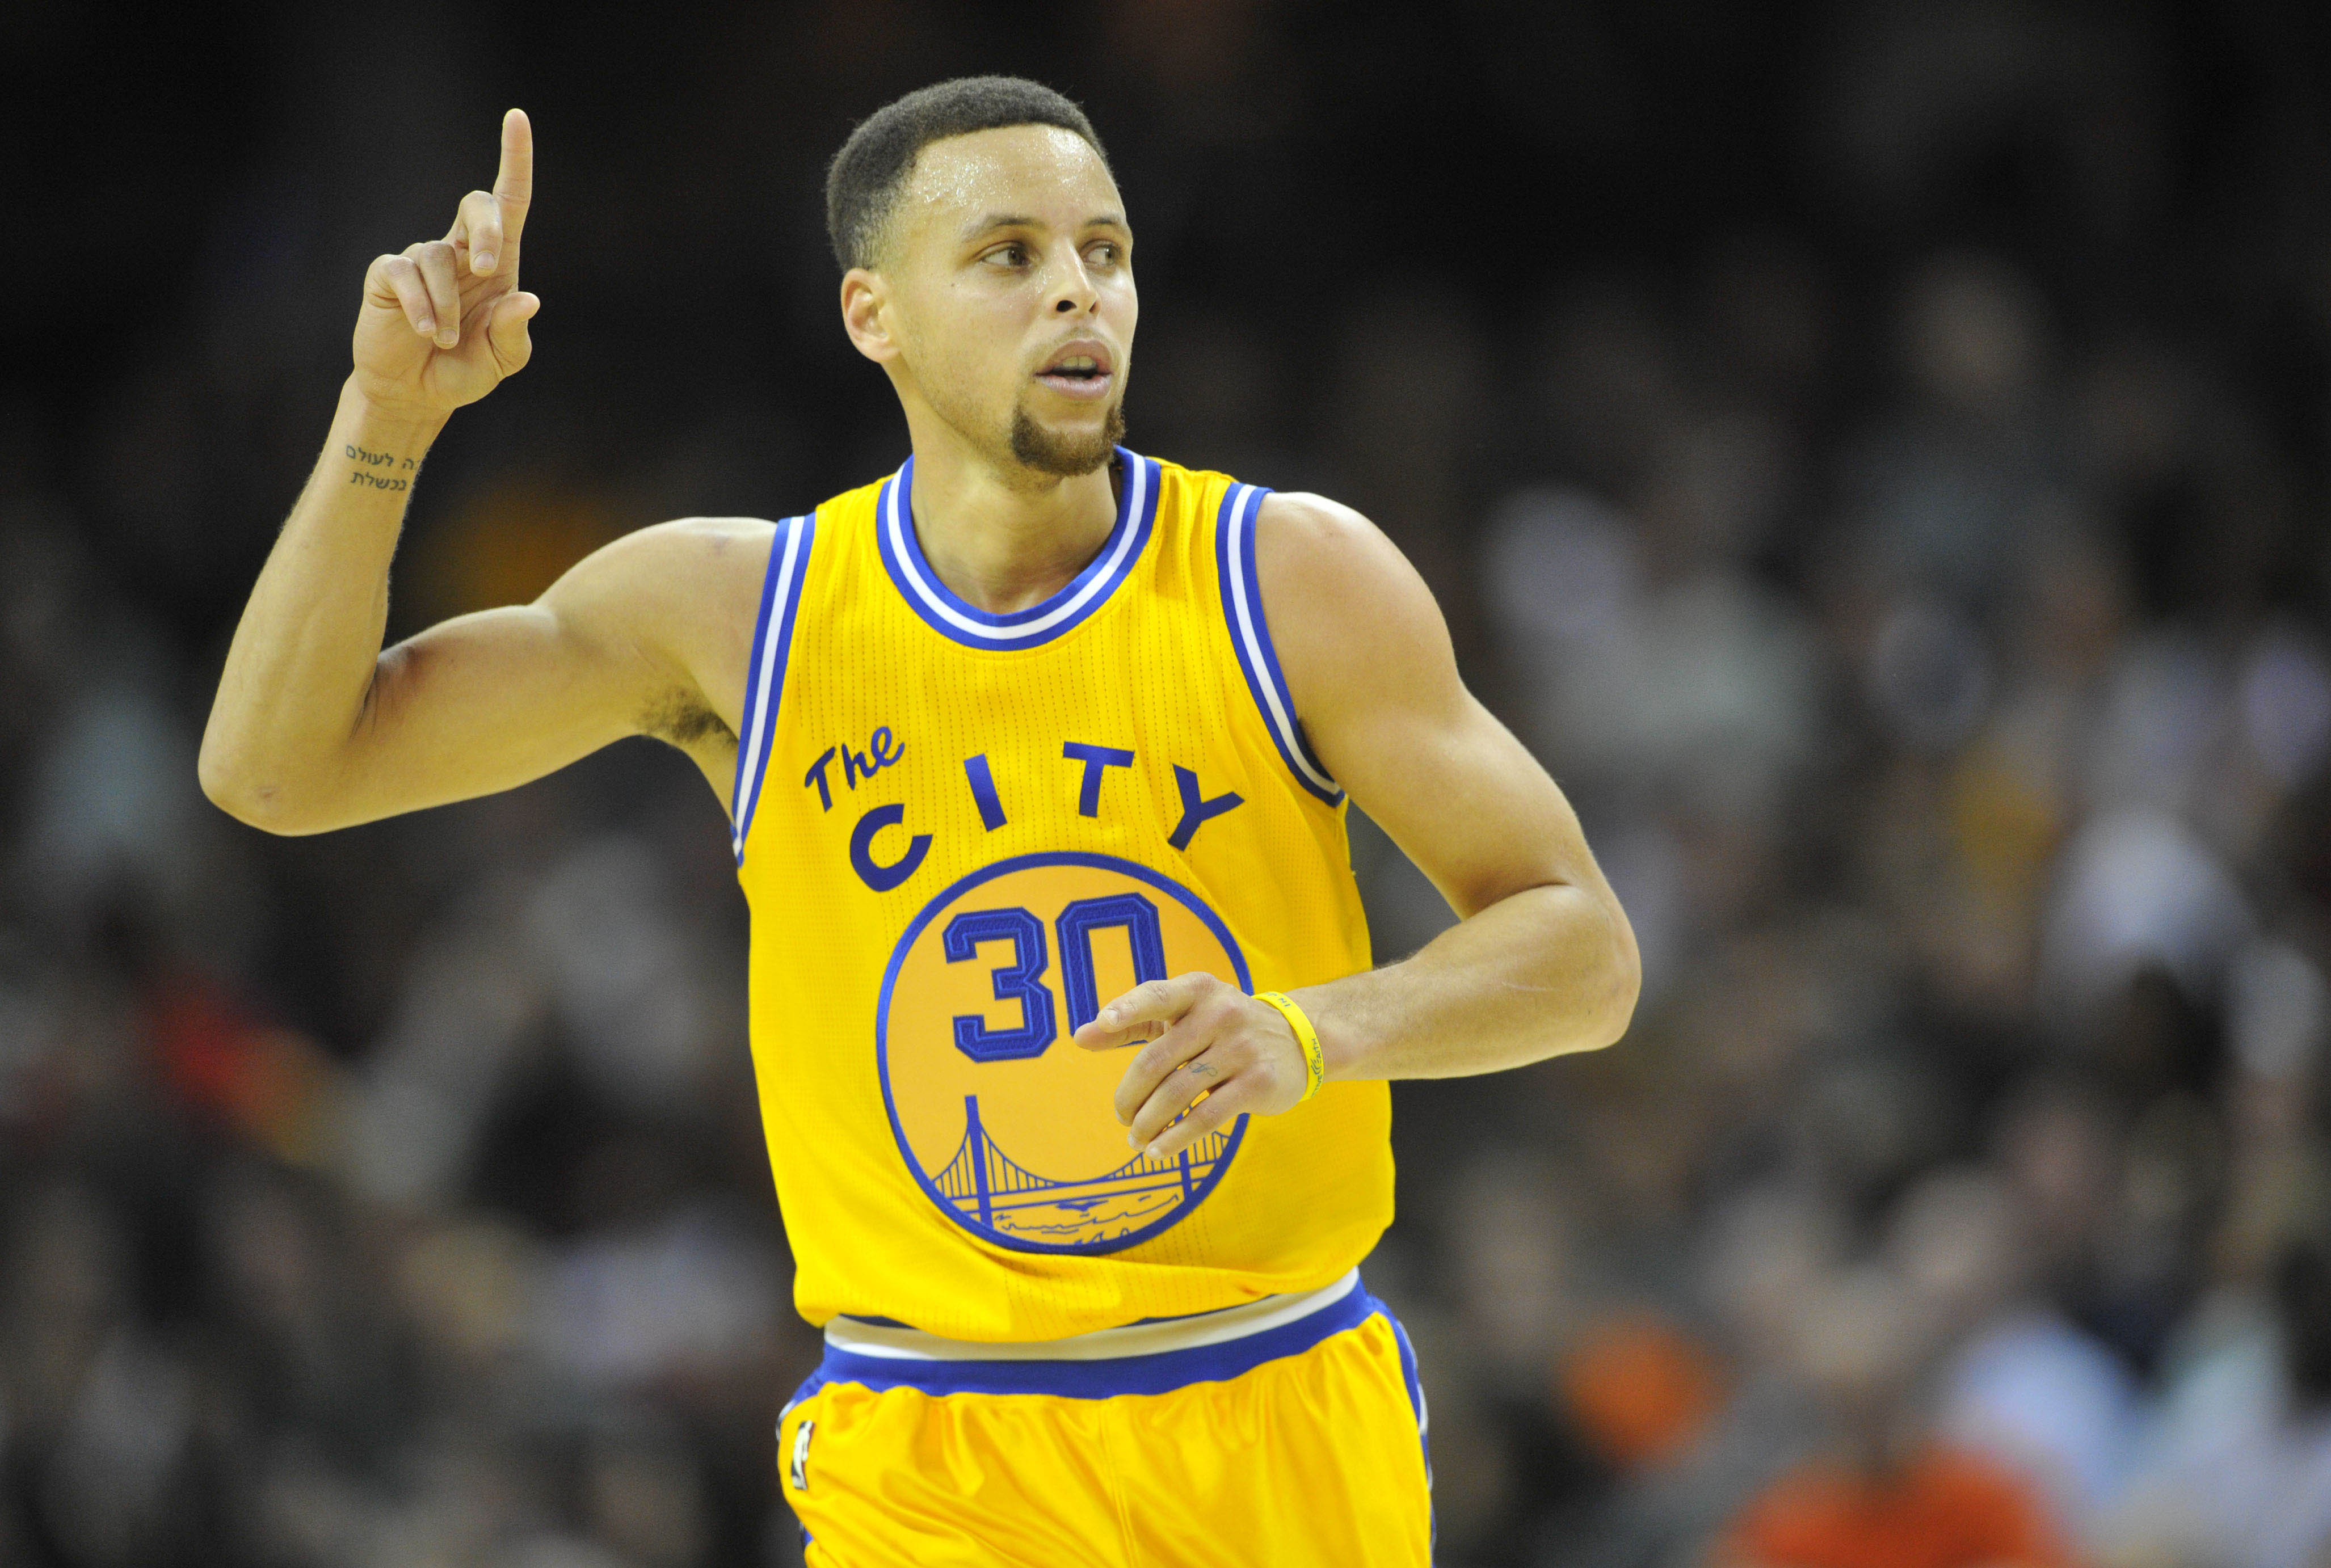 Steph Curry is bestselling City Ed jersey so far